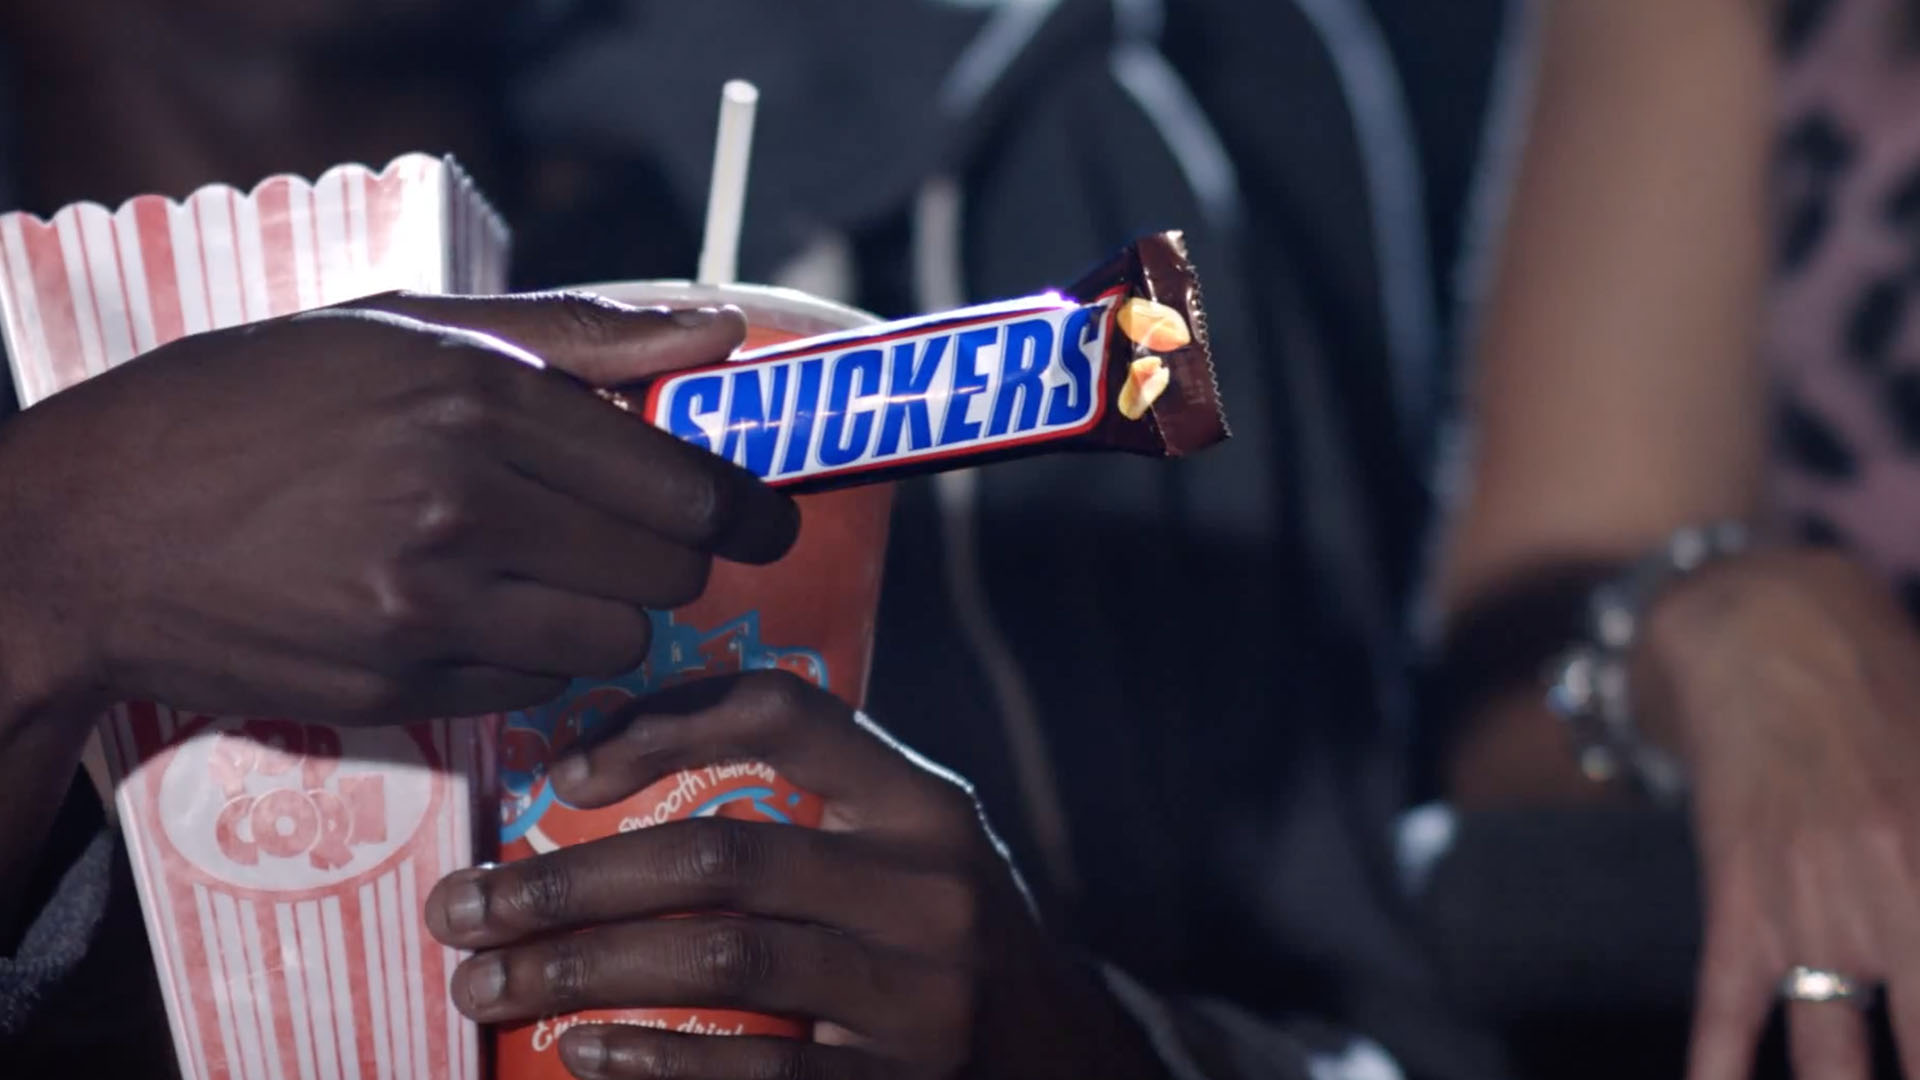 SNICKERS3